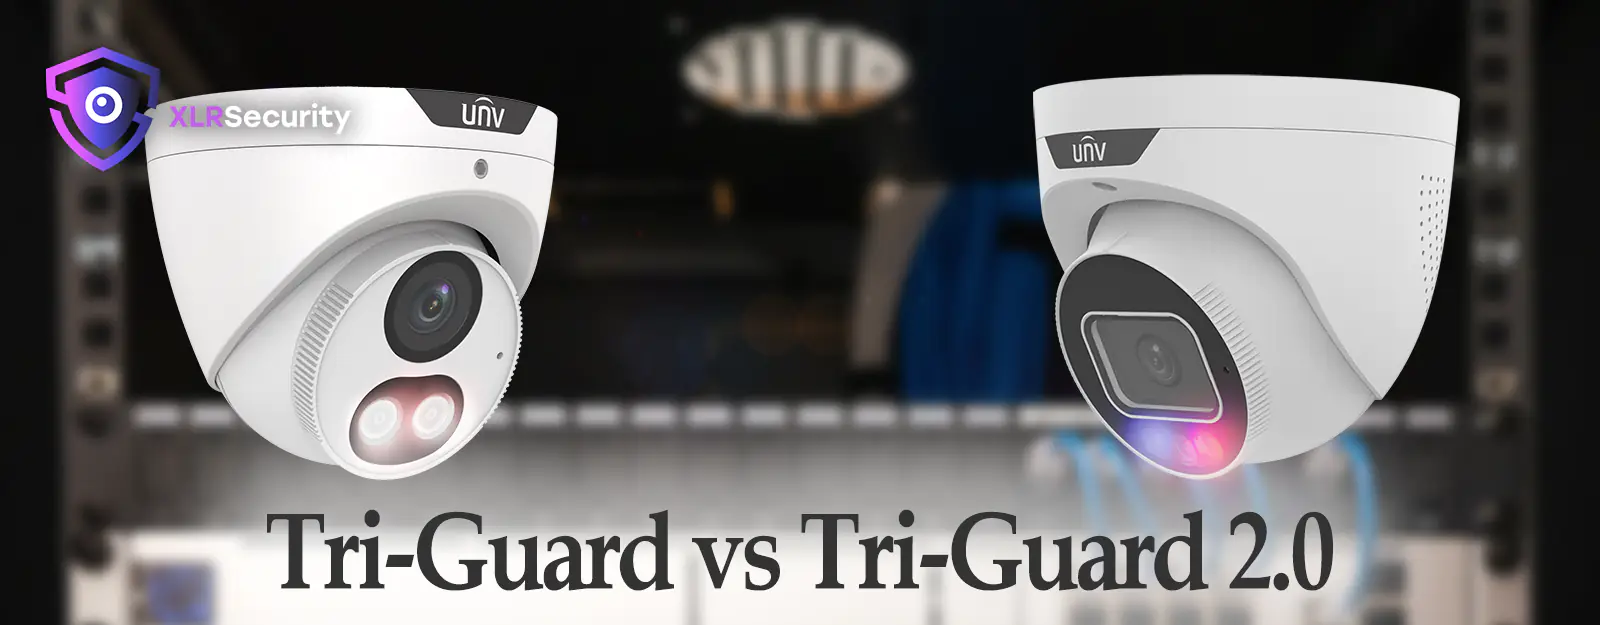 Two Uniview Tri-Guard cameras facing off against each other with the text Tri-Guard vs Tri-Guard 2.0 beneath them